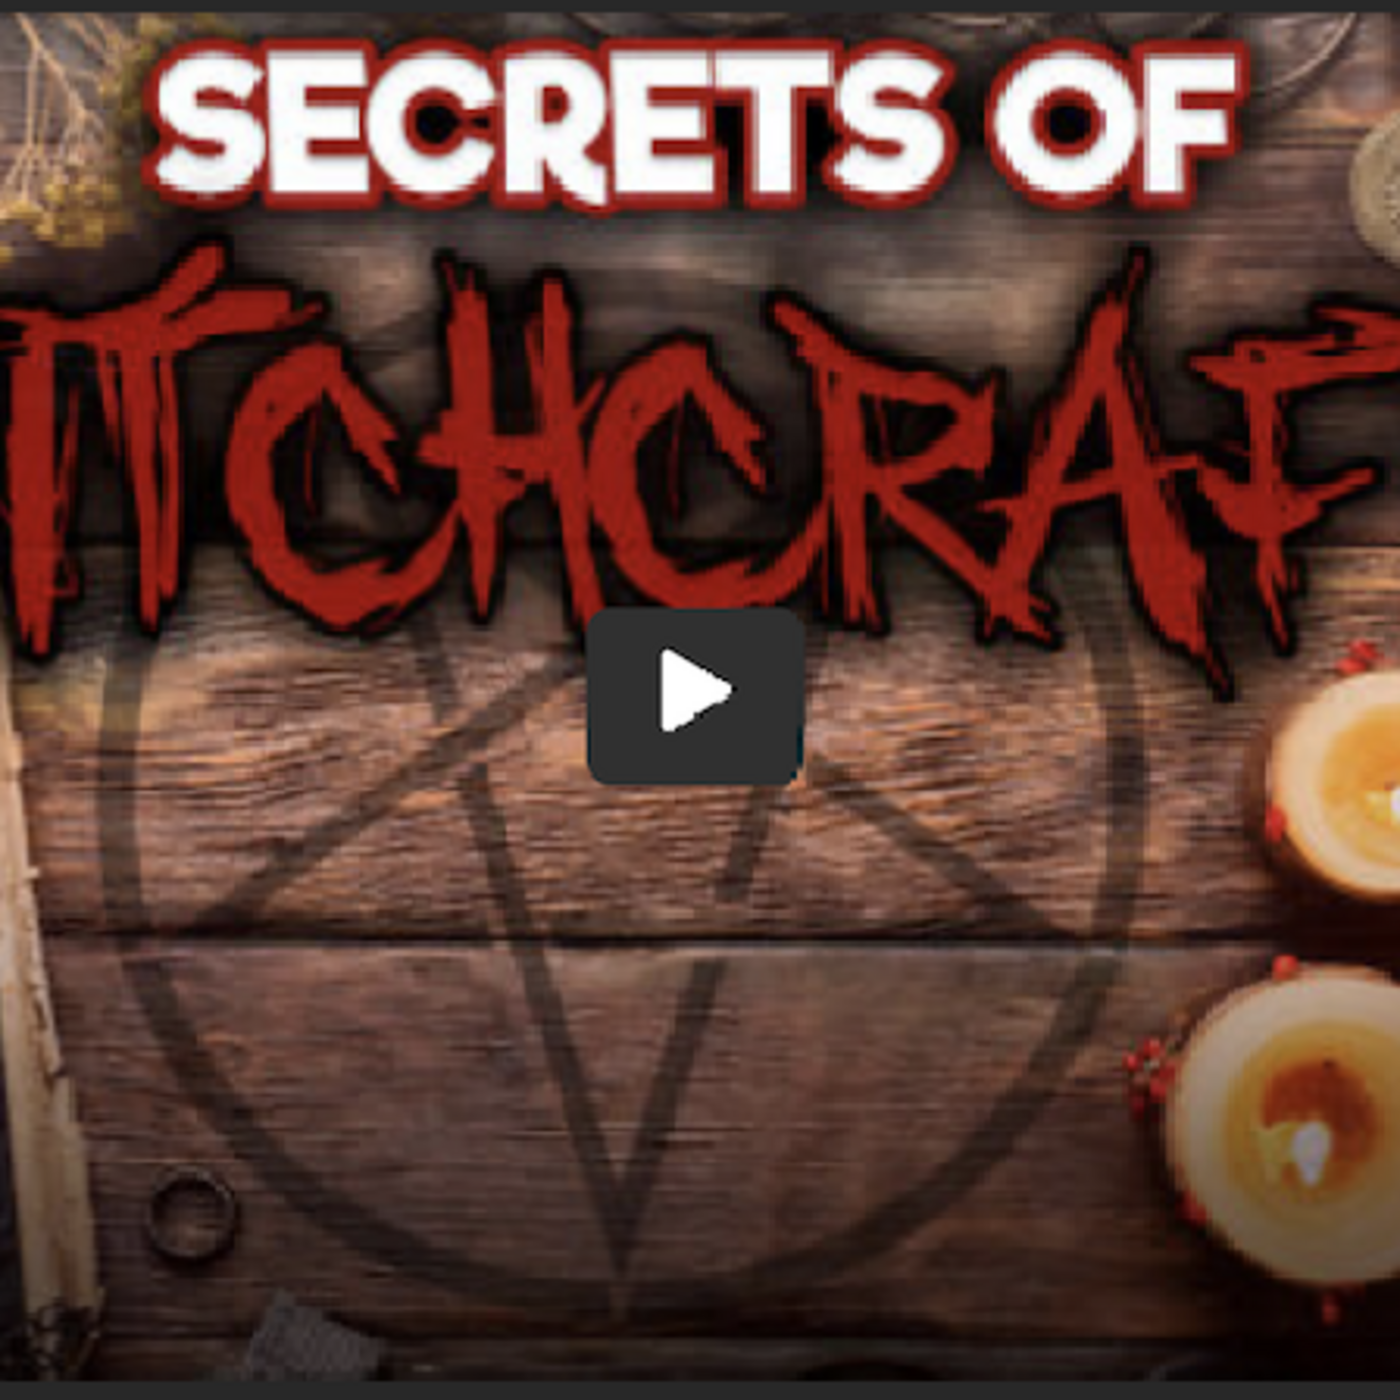 Secrets of Witchcraft They Don’t Want You To Know